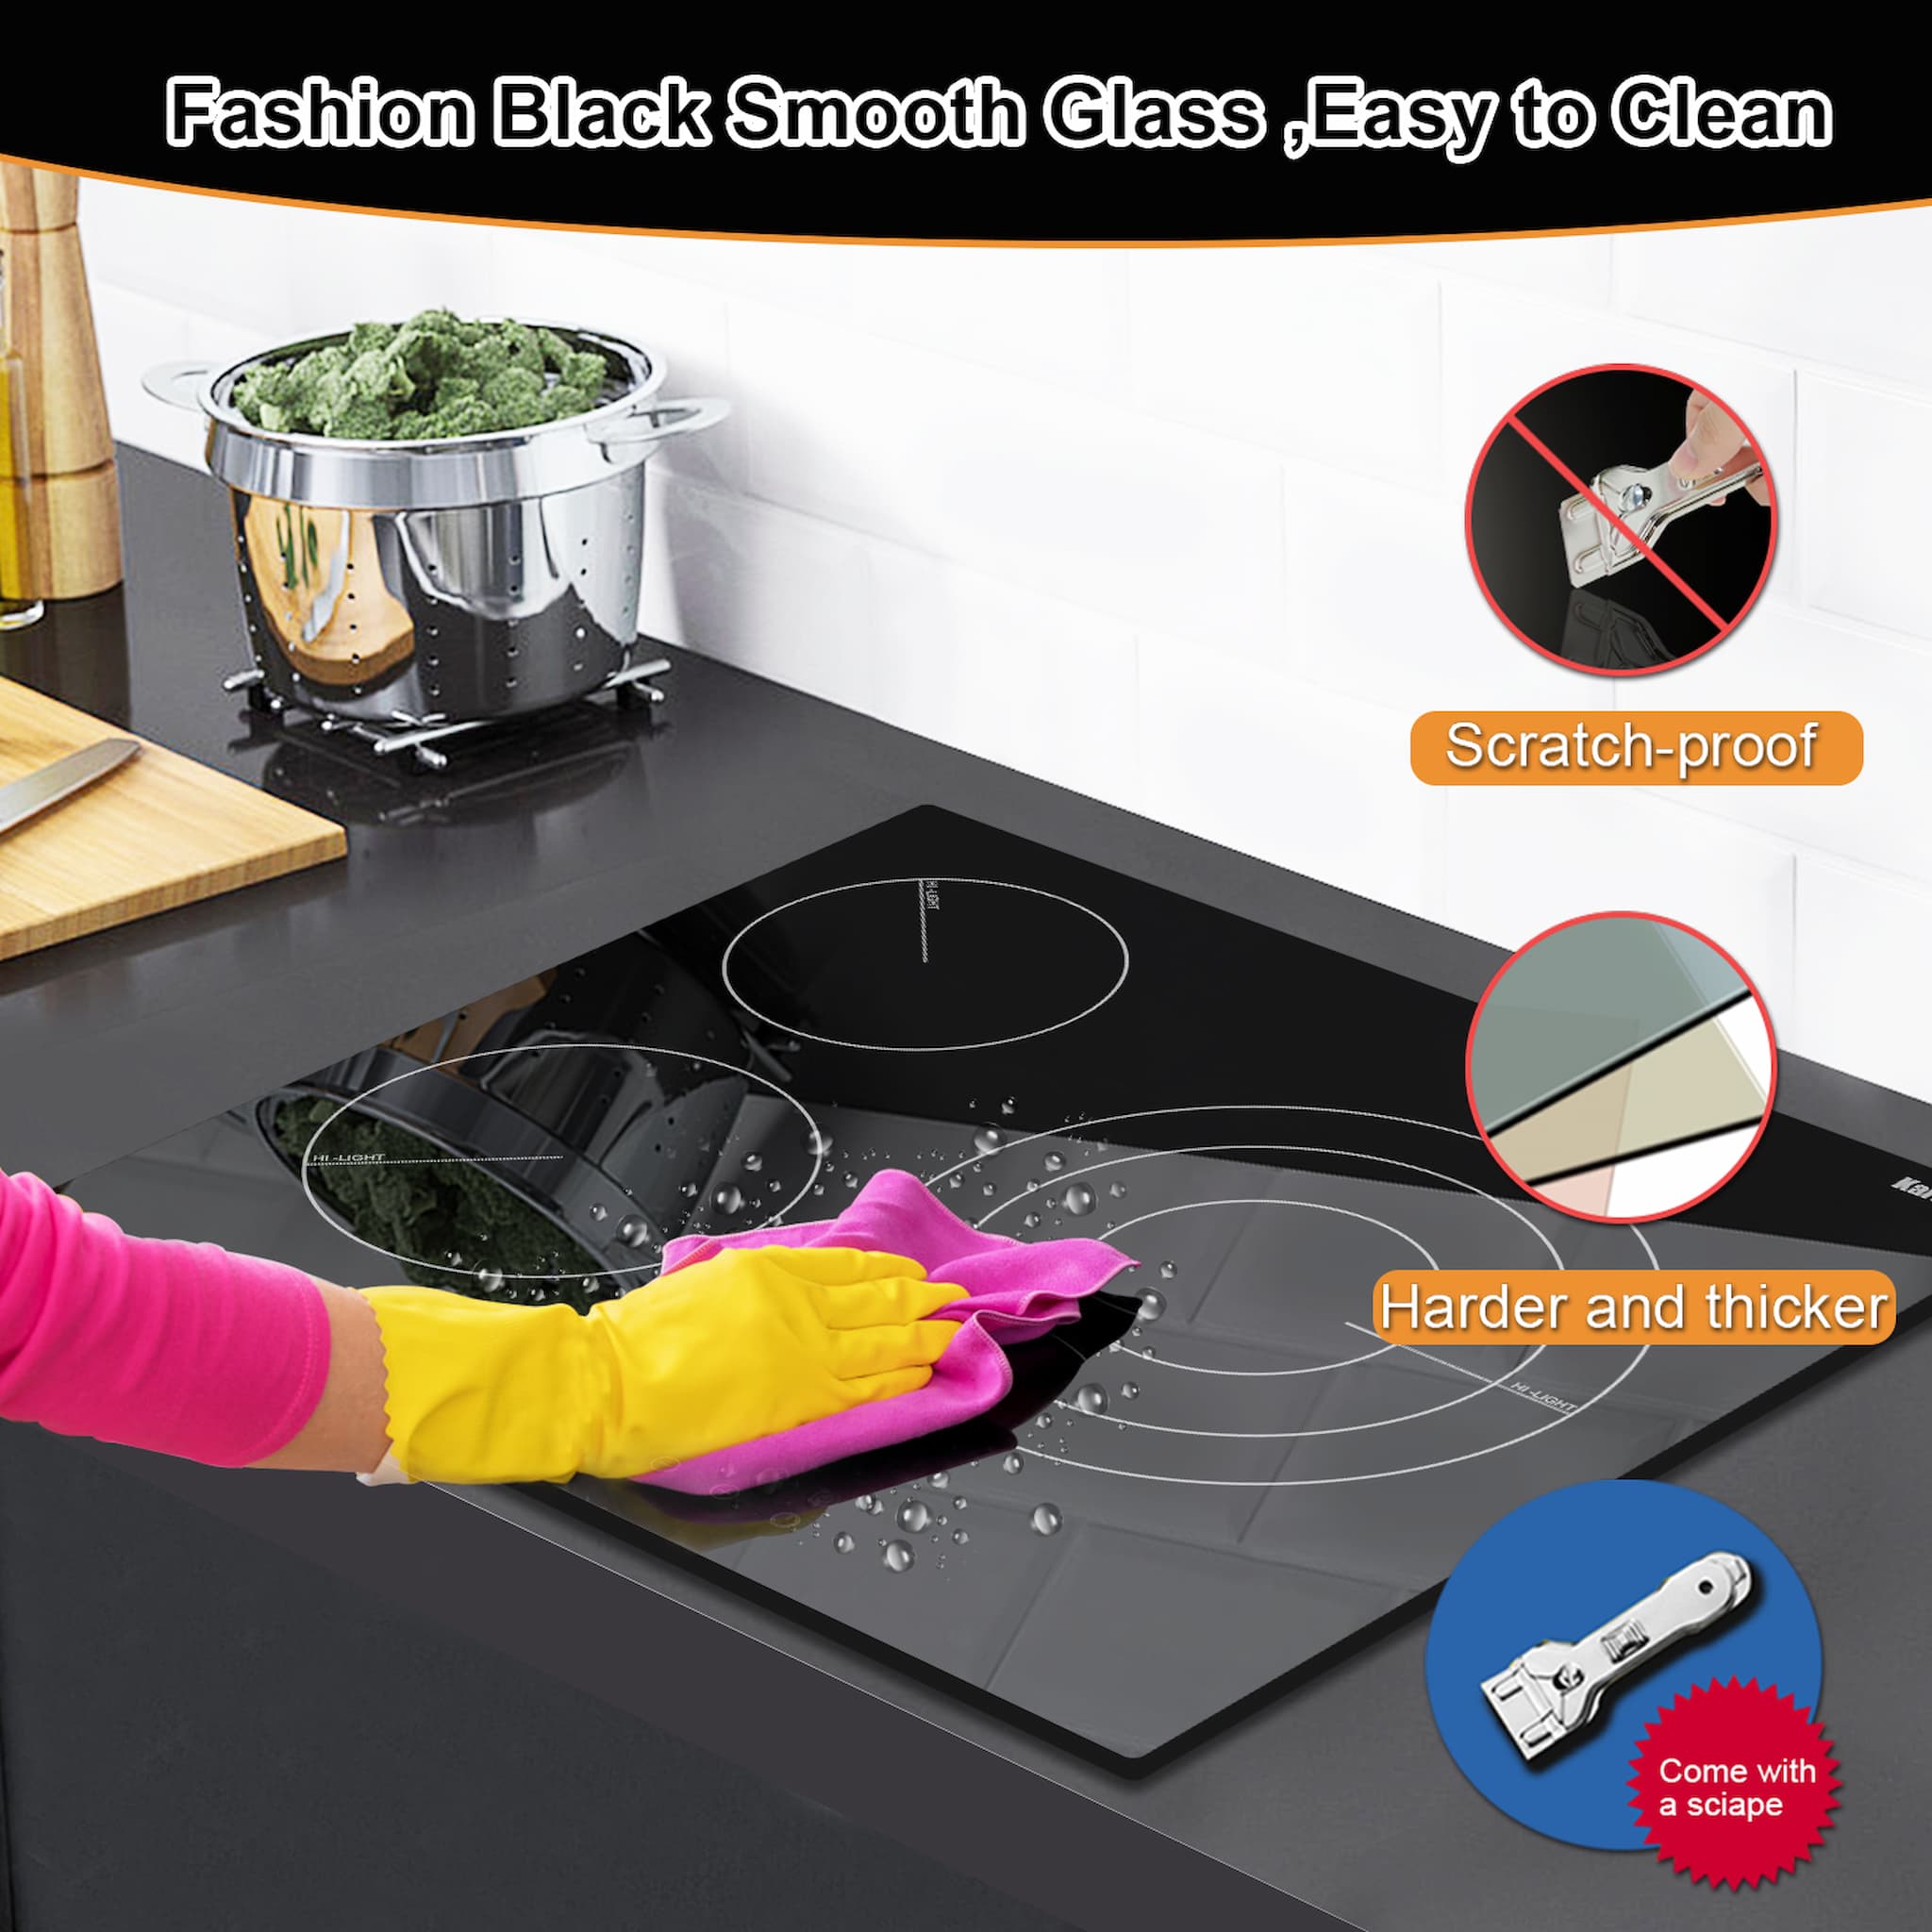 This glass electric stove surface is made with high quality black smooth glass. Scratch resistant, high temperature resistant and easy to clean. Use our cleaning scraper with confidence!